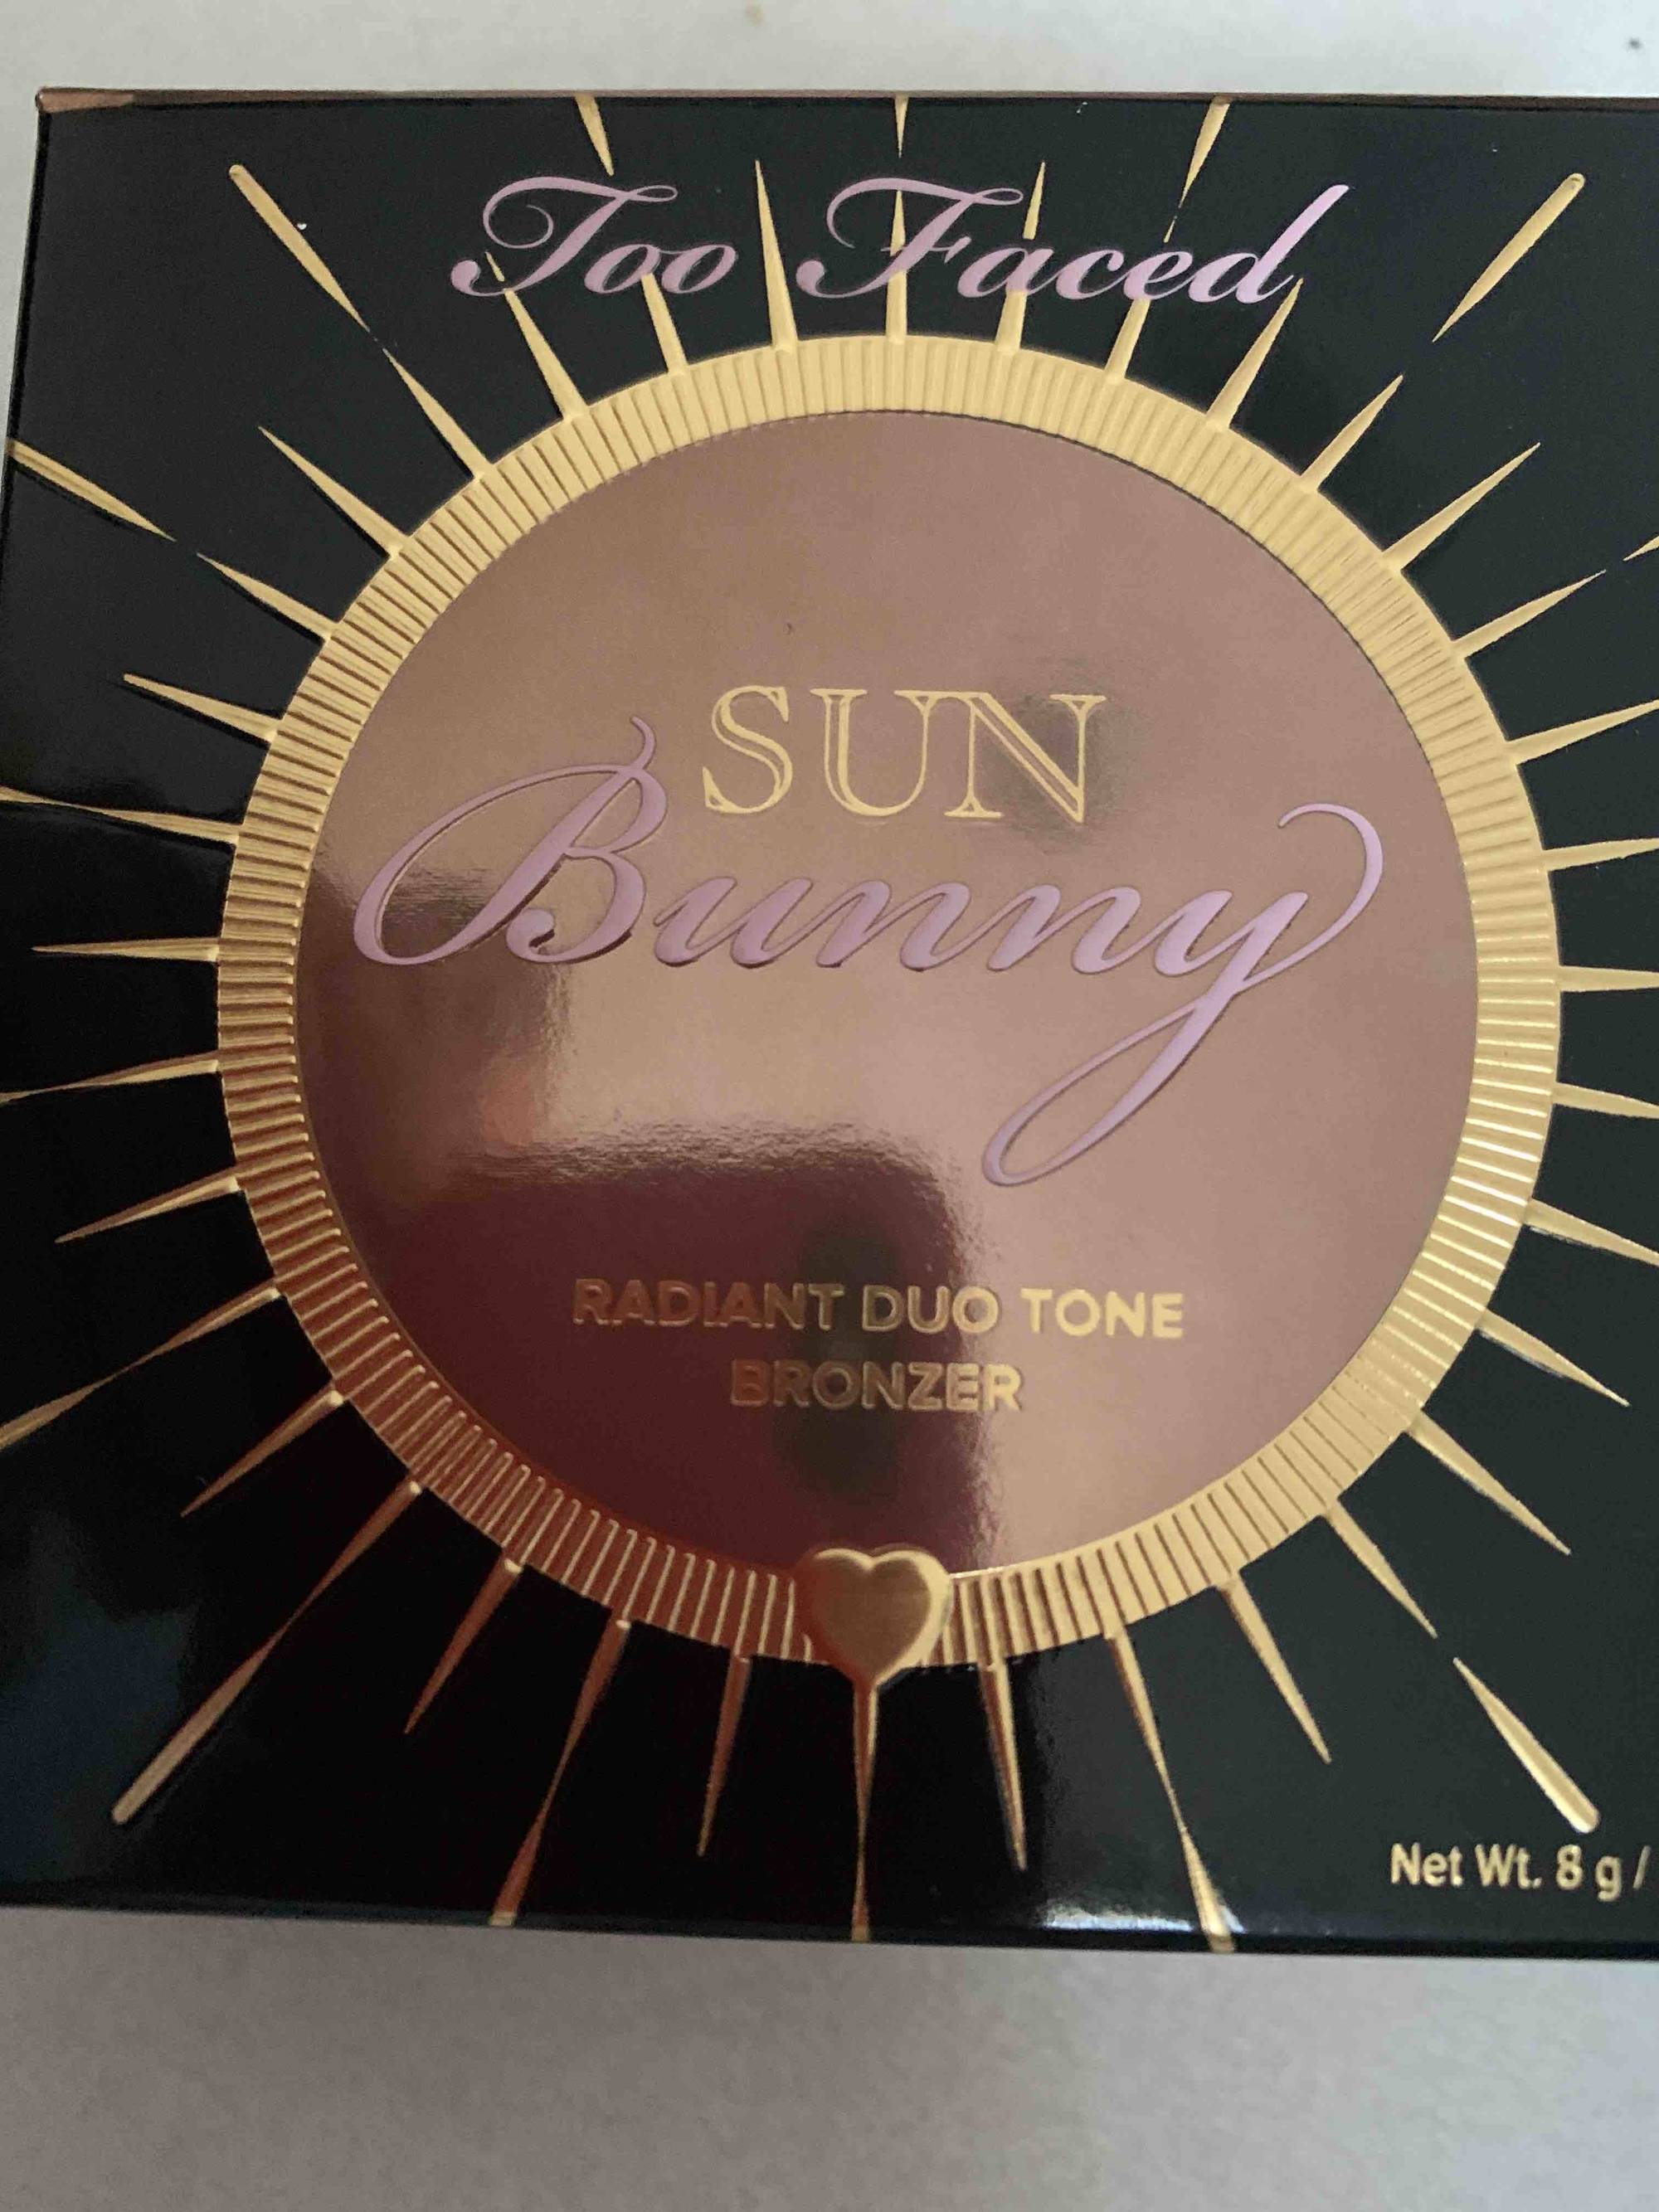 TOO FACED - Sun bunny - Radiant duo tone bronzer